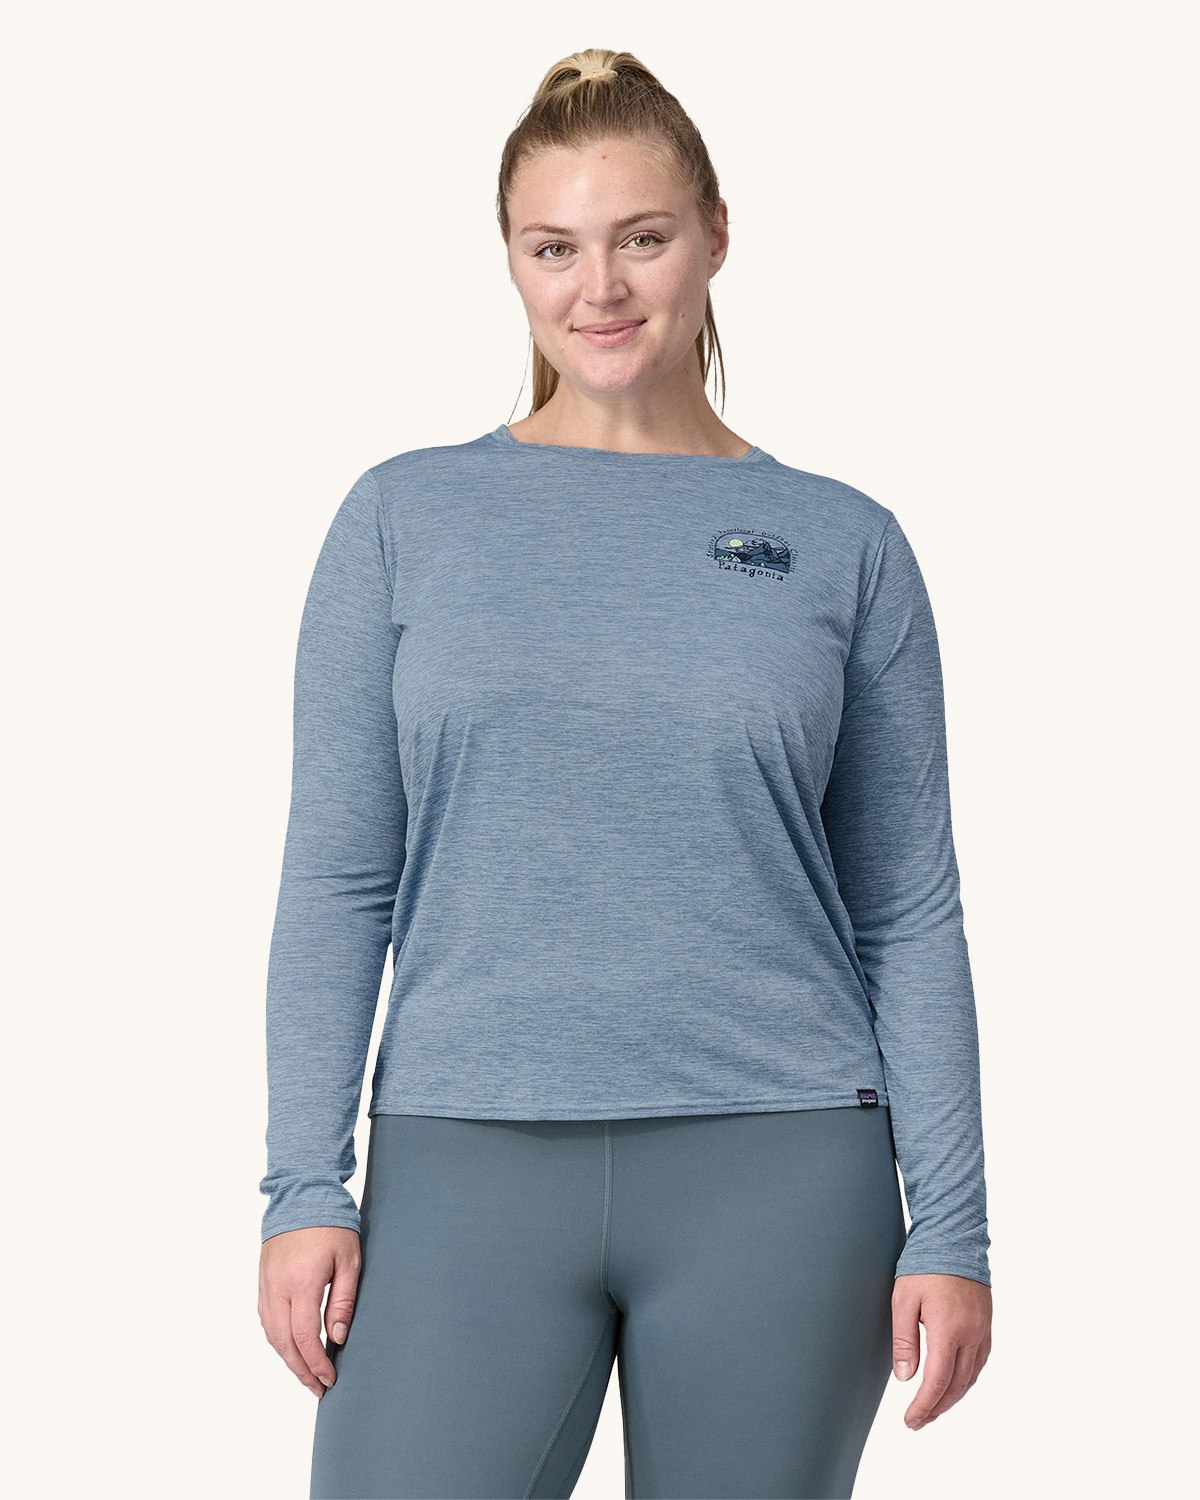 Women's Tall Pants by Patagonia